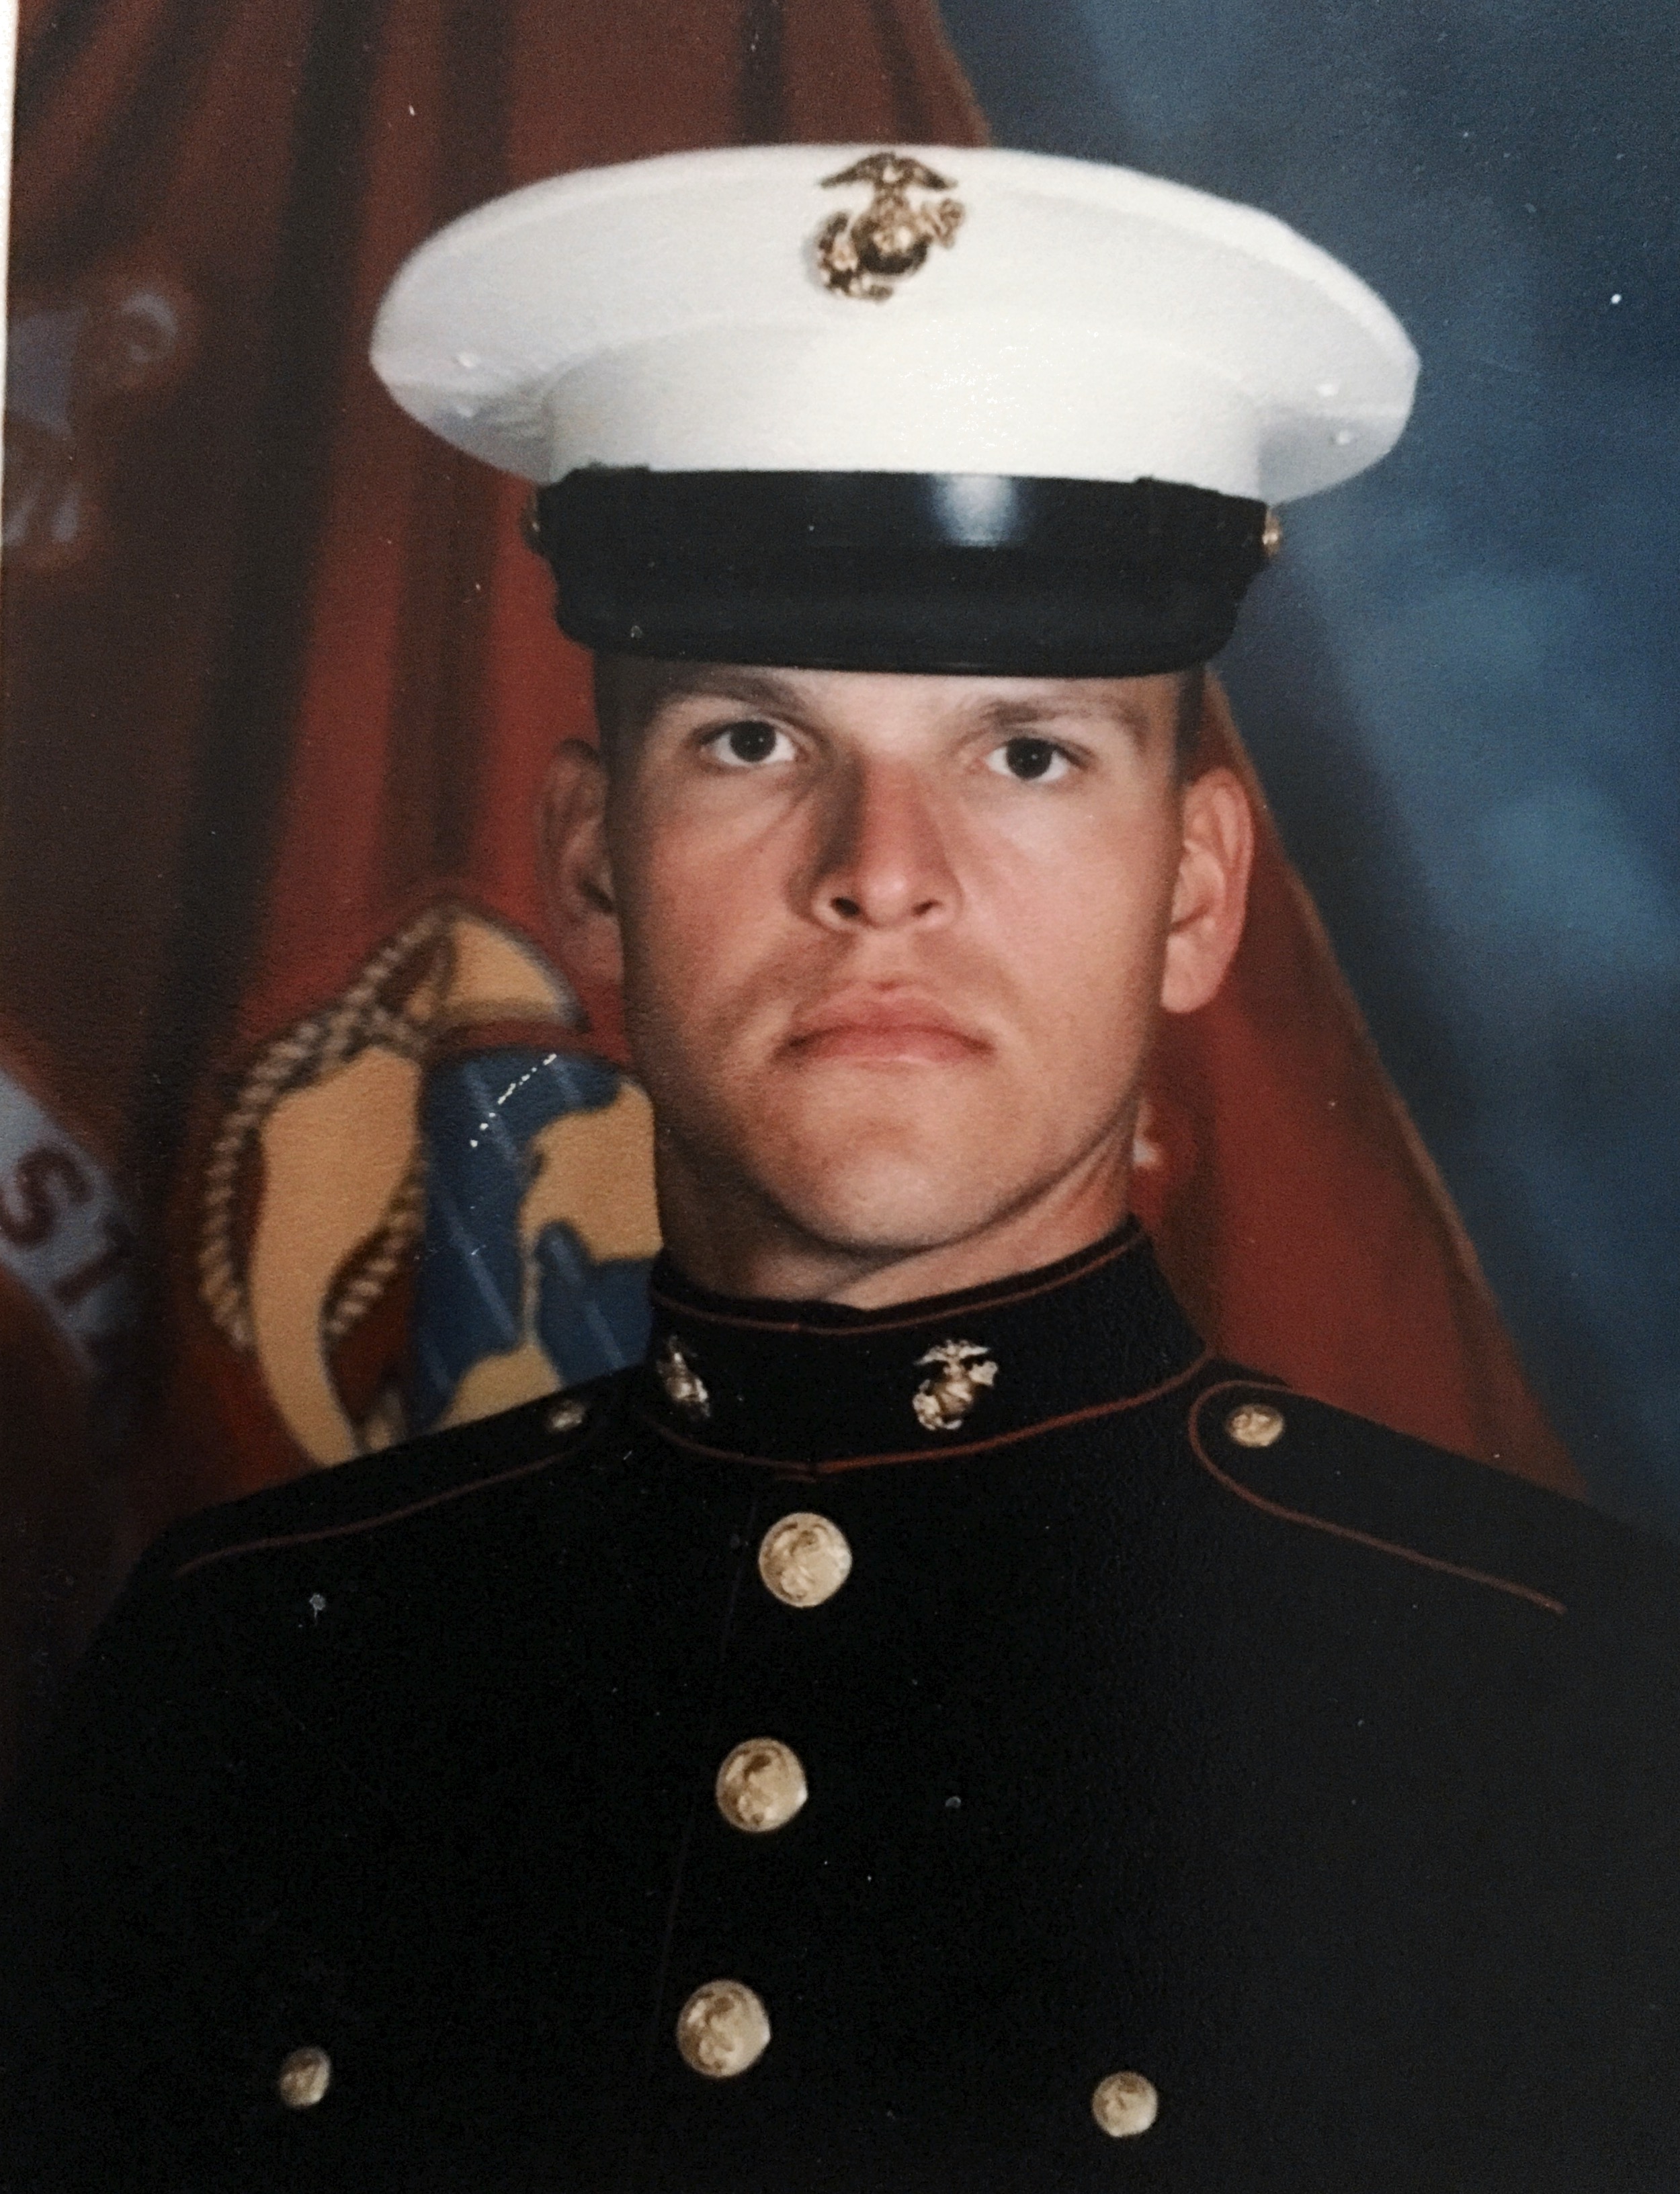 Taken just days before boot camp ended, First Marines, 1st Division. After serving as a City Police Officer, he decided to join the United States Marine Corps, at the age of 23 !! Each year on Veteran’s Day, immediately following the Birthday of USMC, I salute my husband, as well as all the men and women who have served our beautiful country. It’s a tough job. I’m so proud of and for my husband, This November, we celebrate 30 years of marriage. 💜